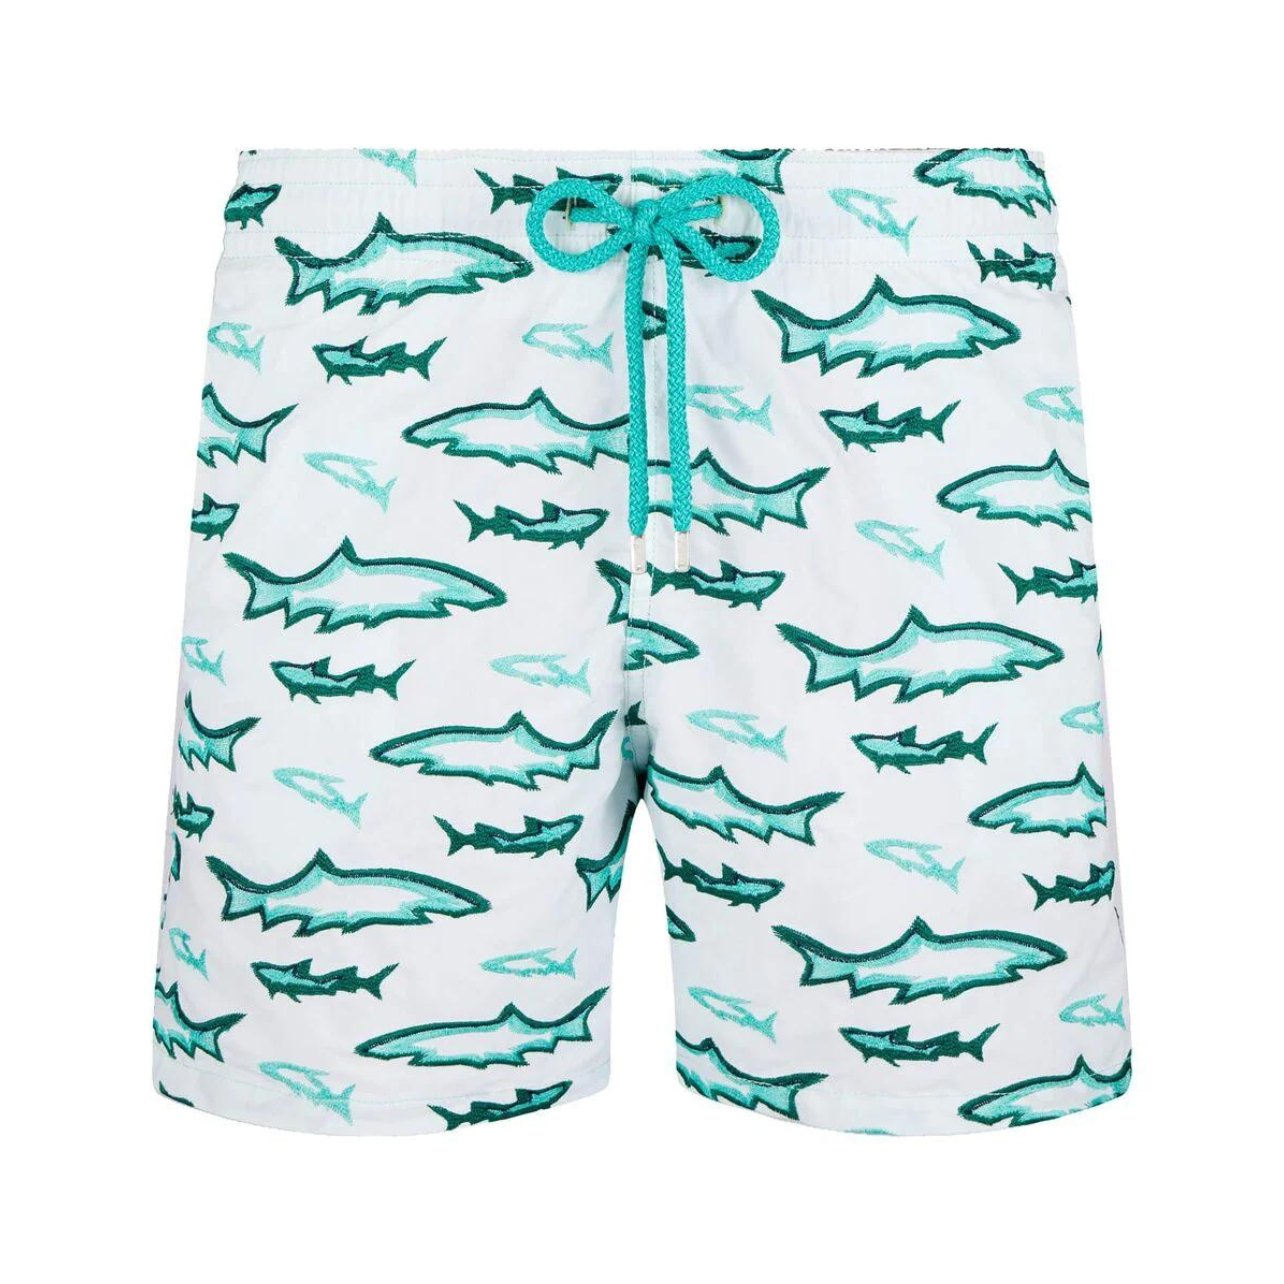 Vilebrequin swim trunks in white with embroidered 3D green sharks